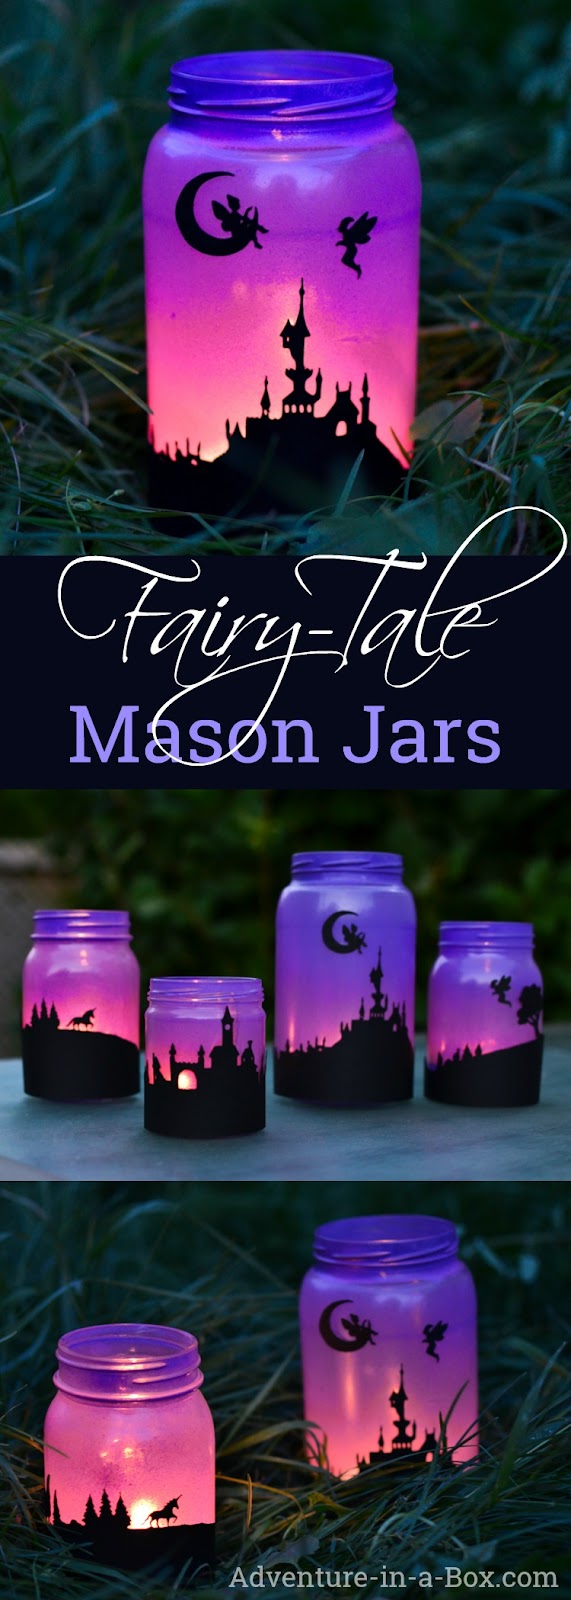 Are you in search of some awesome mason jar crafts? This list has 50 incredible craft projects from bathroom accessories to garden solar lights, that you can DIY easily using Mason Jars or jars from your recycling box! So for a huge list of easy diy crafts, click through & get ready to start making! #crafts #diy #masonjars #roundup #easycrafts